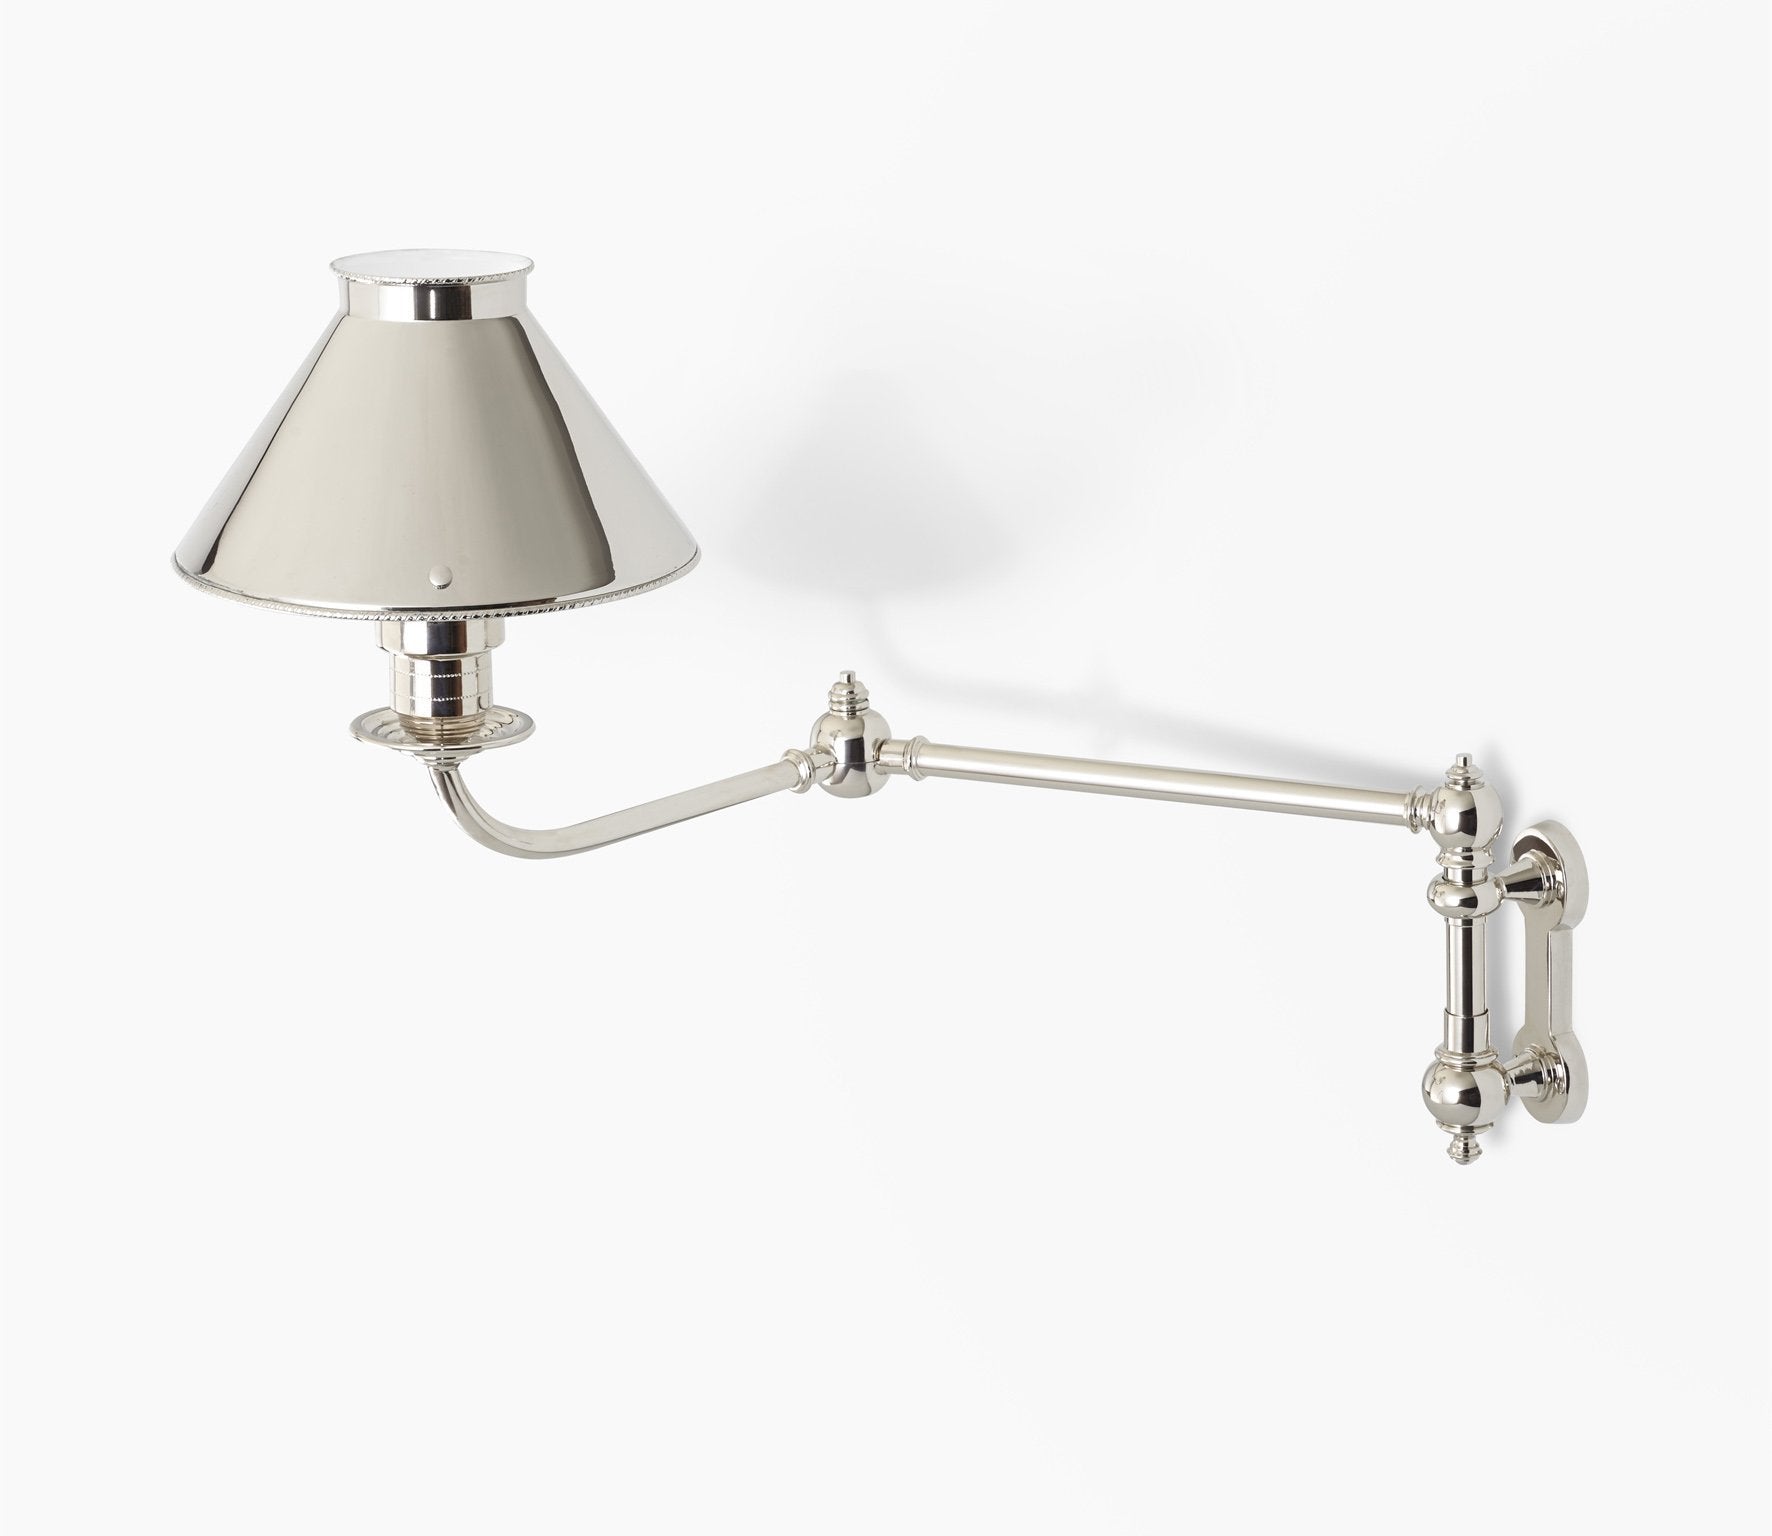 Gilbert Up Wall Light with Metal Shade Product Image 1